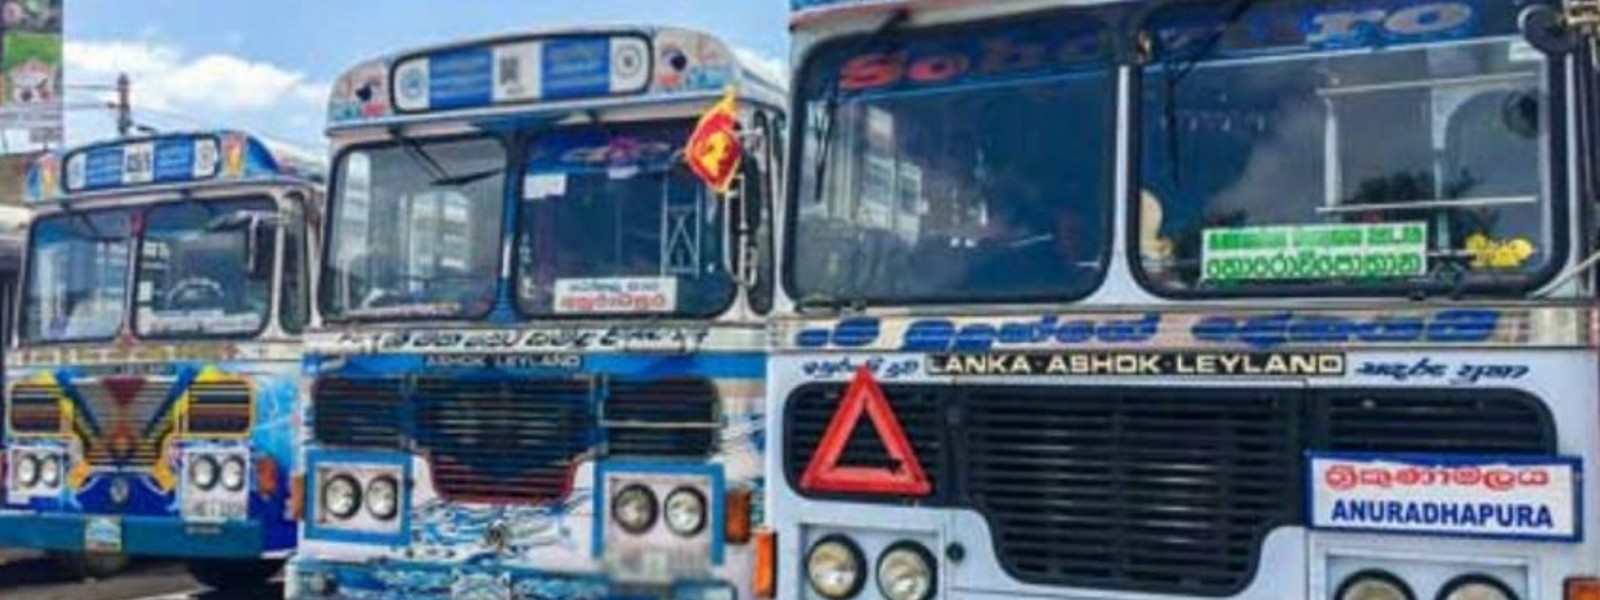 Pvt. Bus workers protest against fuel price hike